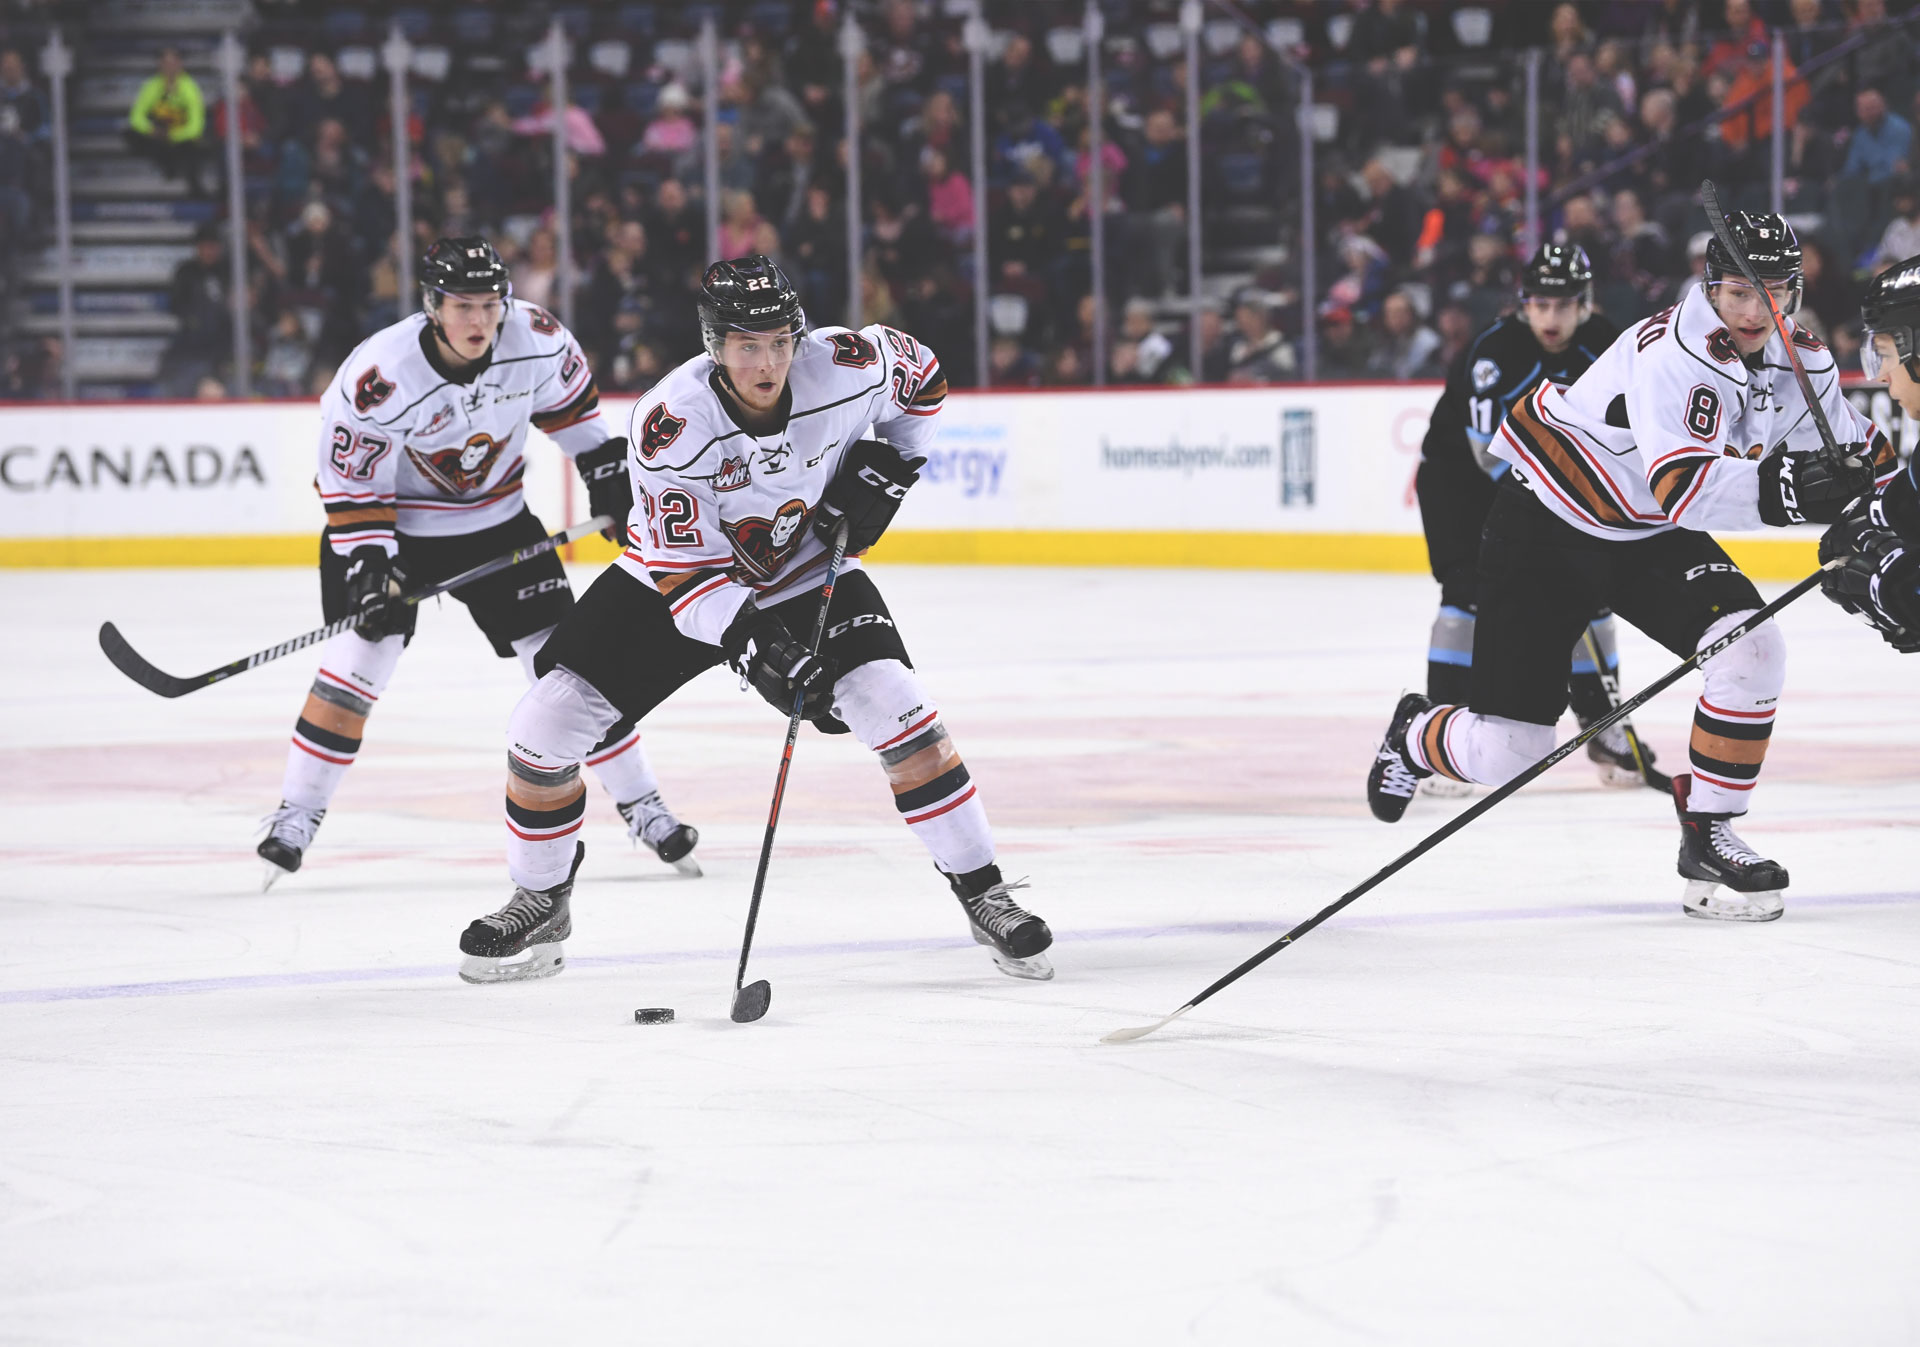 WHL action with the Calgary Hitmen at the Scotiabank Saddledome.